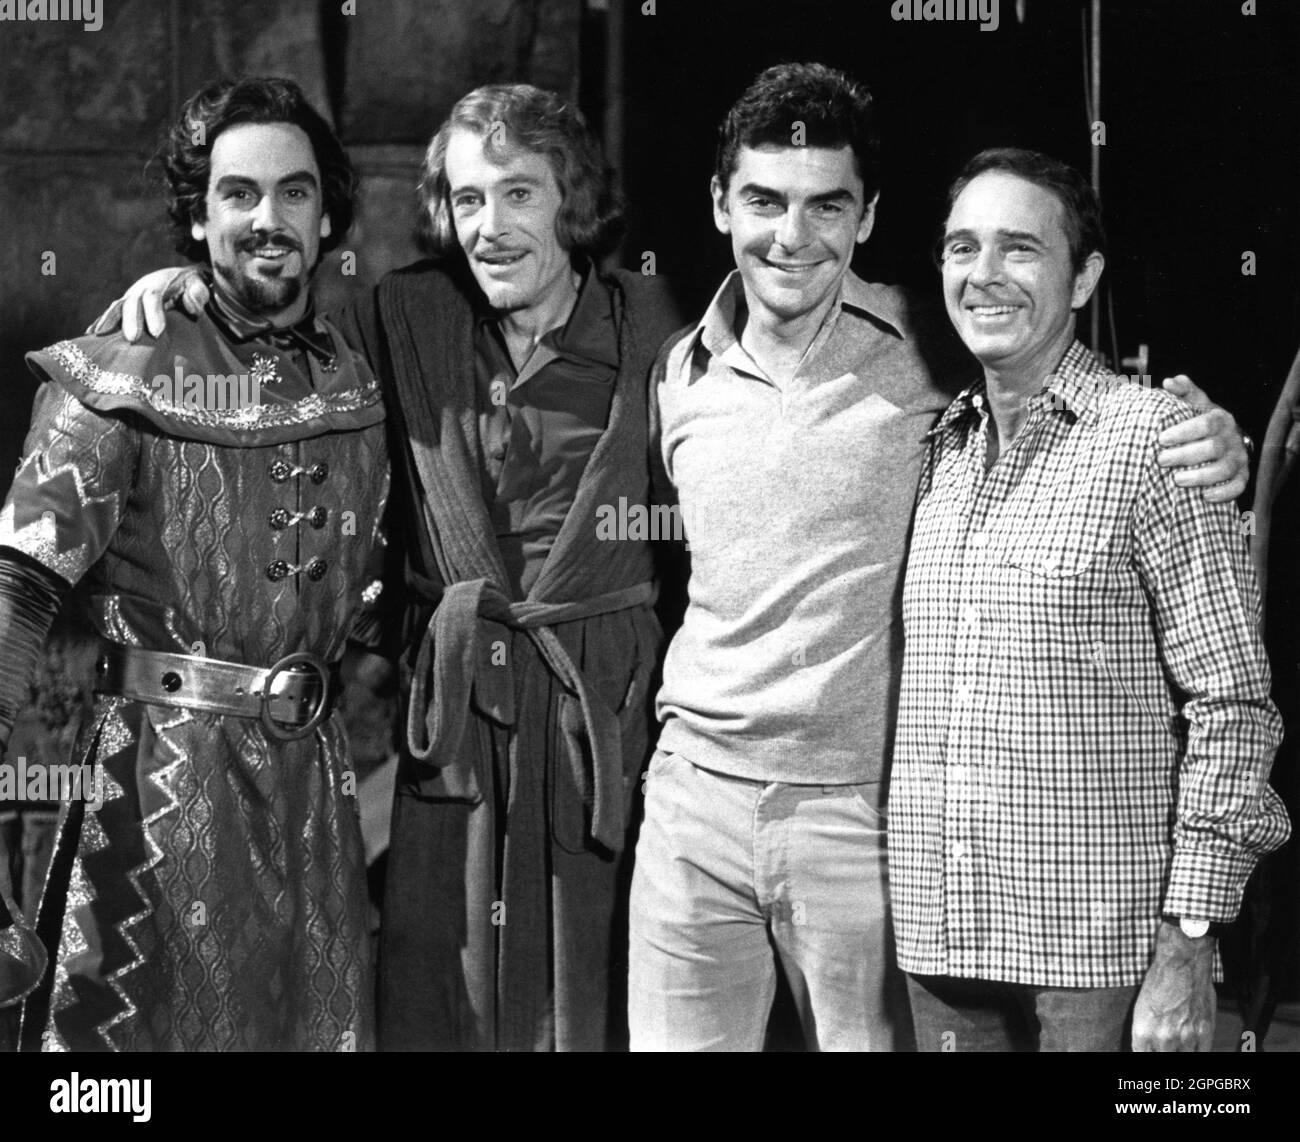 GEORGE MARSHALL RUGE as Lord Drummond (fictionalised Basil Rathbone as Sir Guy of Gisbourne) PETER O'TOOLE as Allan Swann (fictionalised Errol Flynn) in costume as Robin Hood Director RICHARD BENJAMIN and Variety Columnist  ARMAND ''ARMY'' ARCHERD on set candid during filming of MY FAVORITE YEAR 1982 director RICHARD BENJAMIN story Dennis Palumbo screenplay Norman Steinberg and Dennis Palumbo executive producer Mel Brooks costume design May Routh Brooksfilms / Metro Goldwyn Mayer Stock Photo